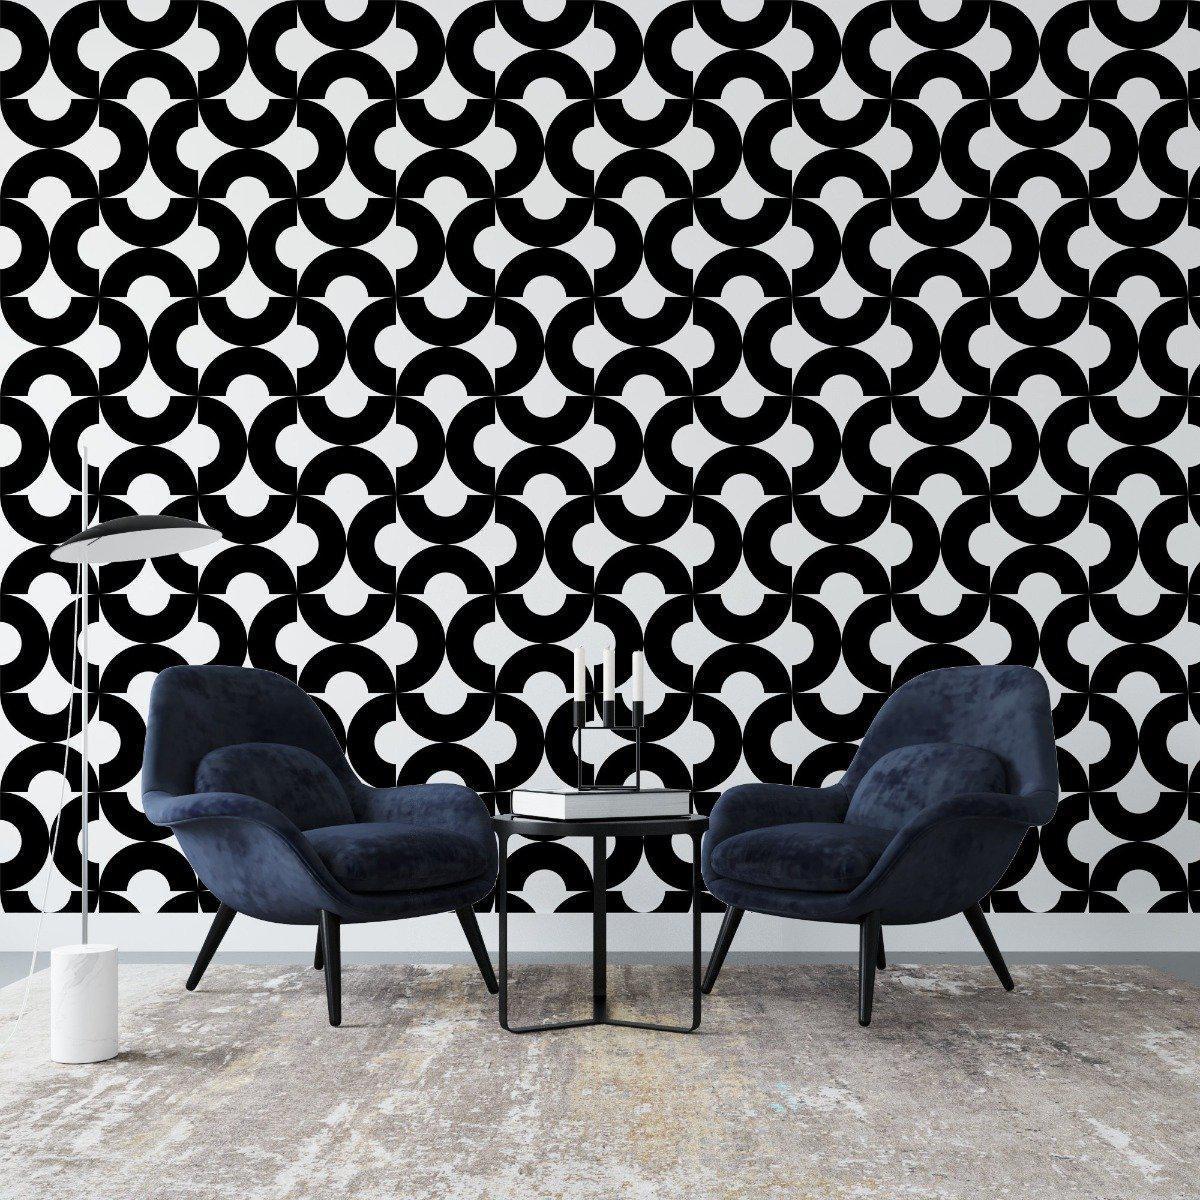 Geometric Peel and Stick Wallpaper Modern Black and White Wallpaper for  Walls Se